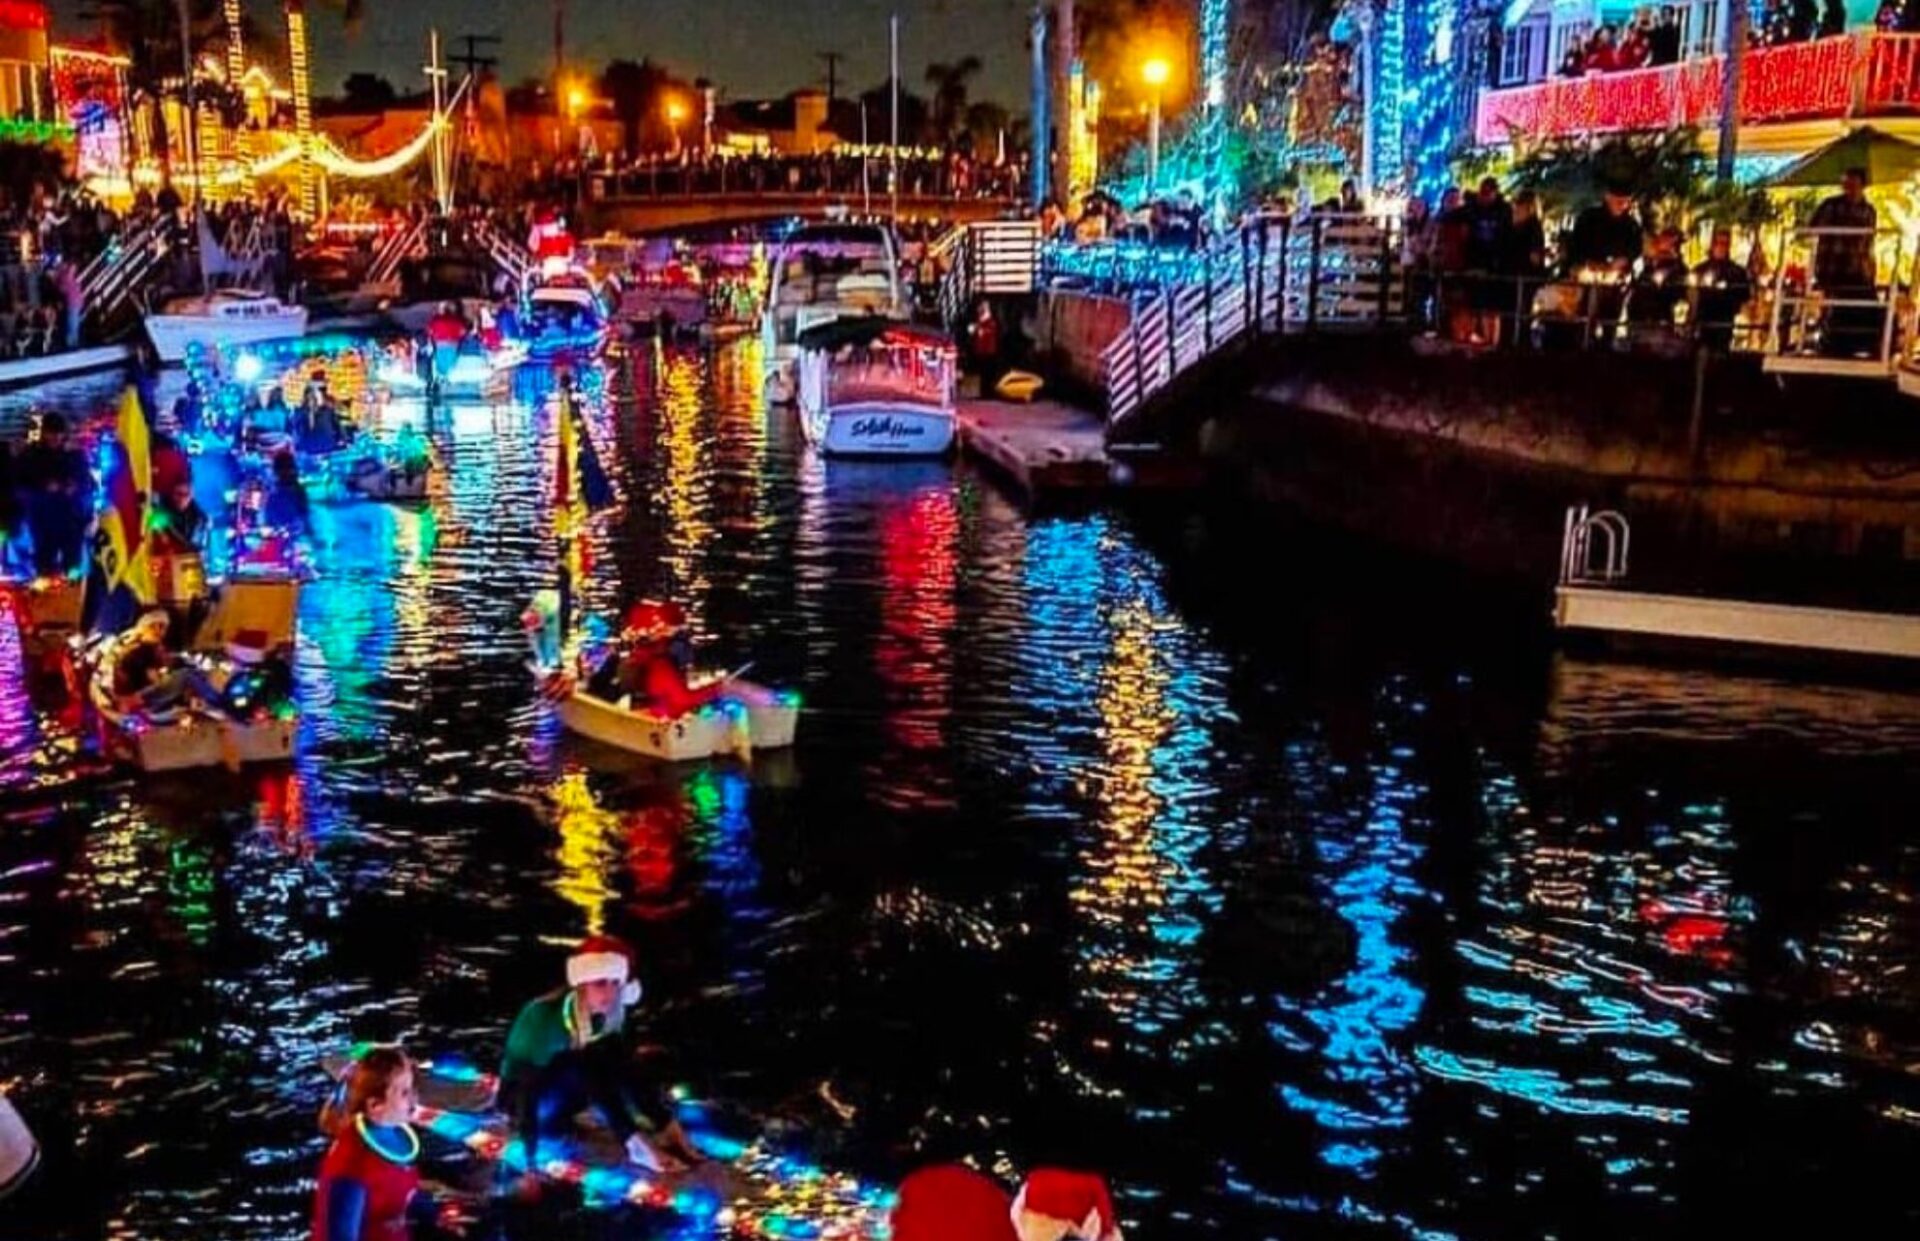 This image shows participants of the Naples Christmas Boat parade that will be held this year on December 16, 2023